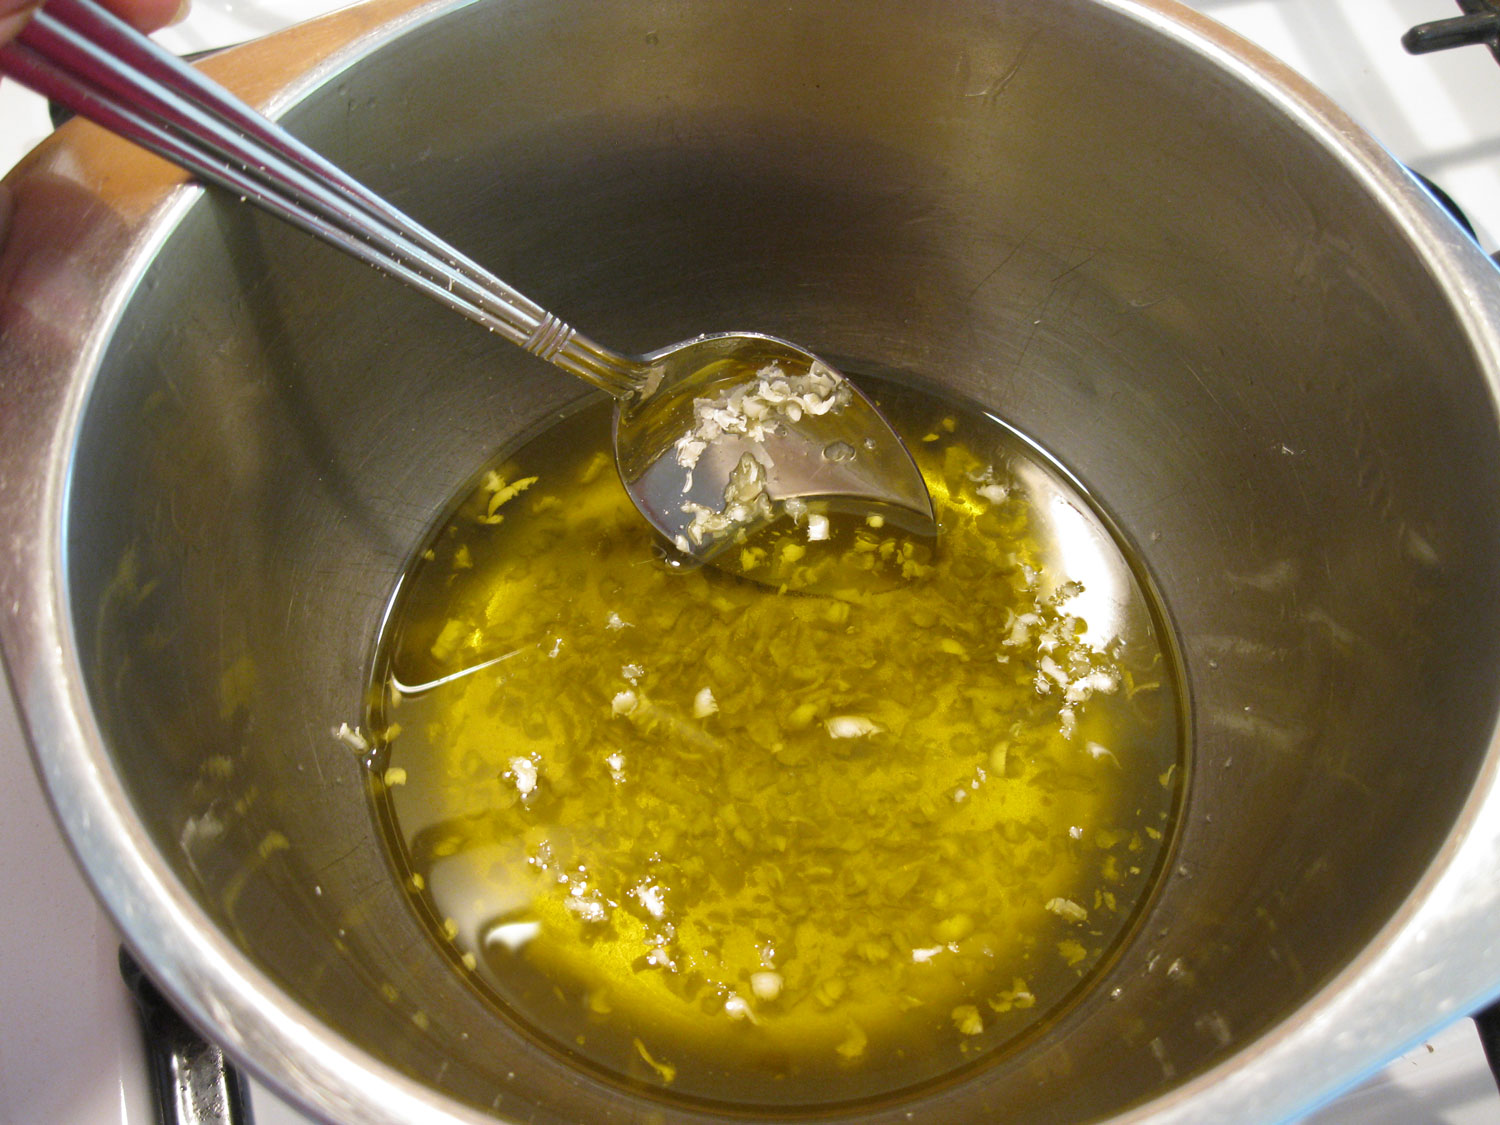 Stirring beeswax into the devil's club infused oil.